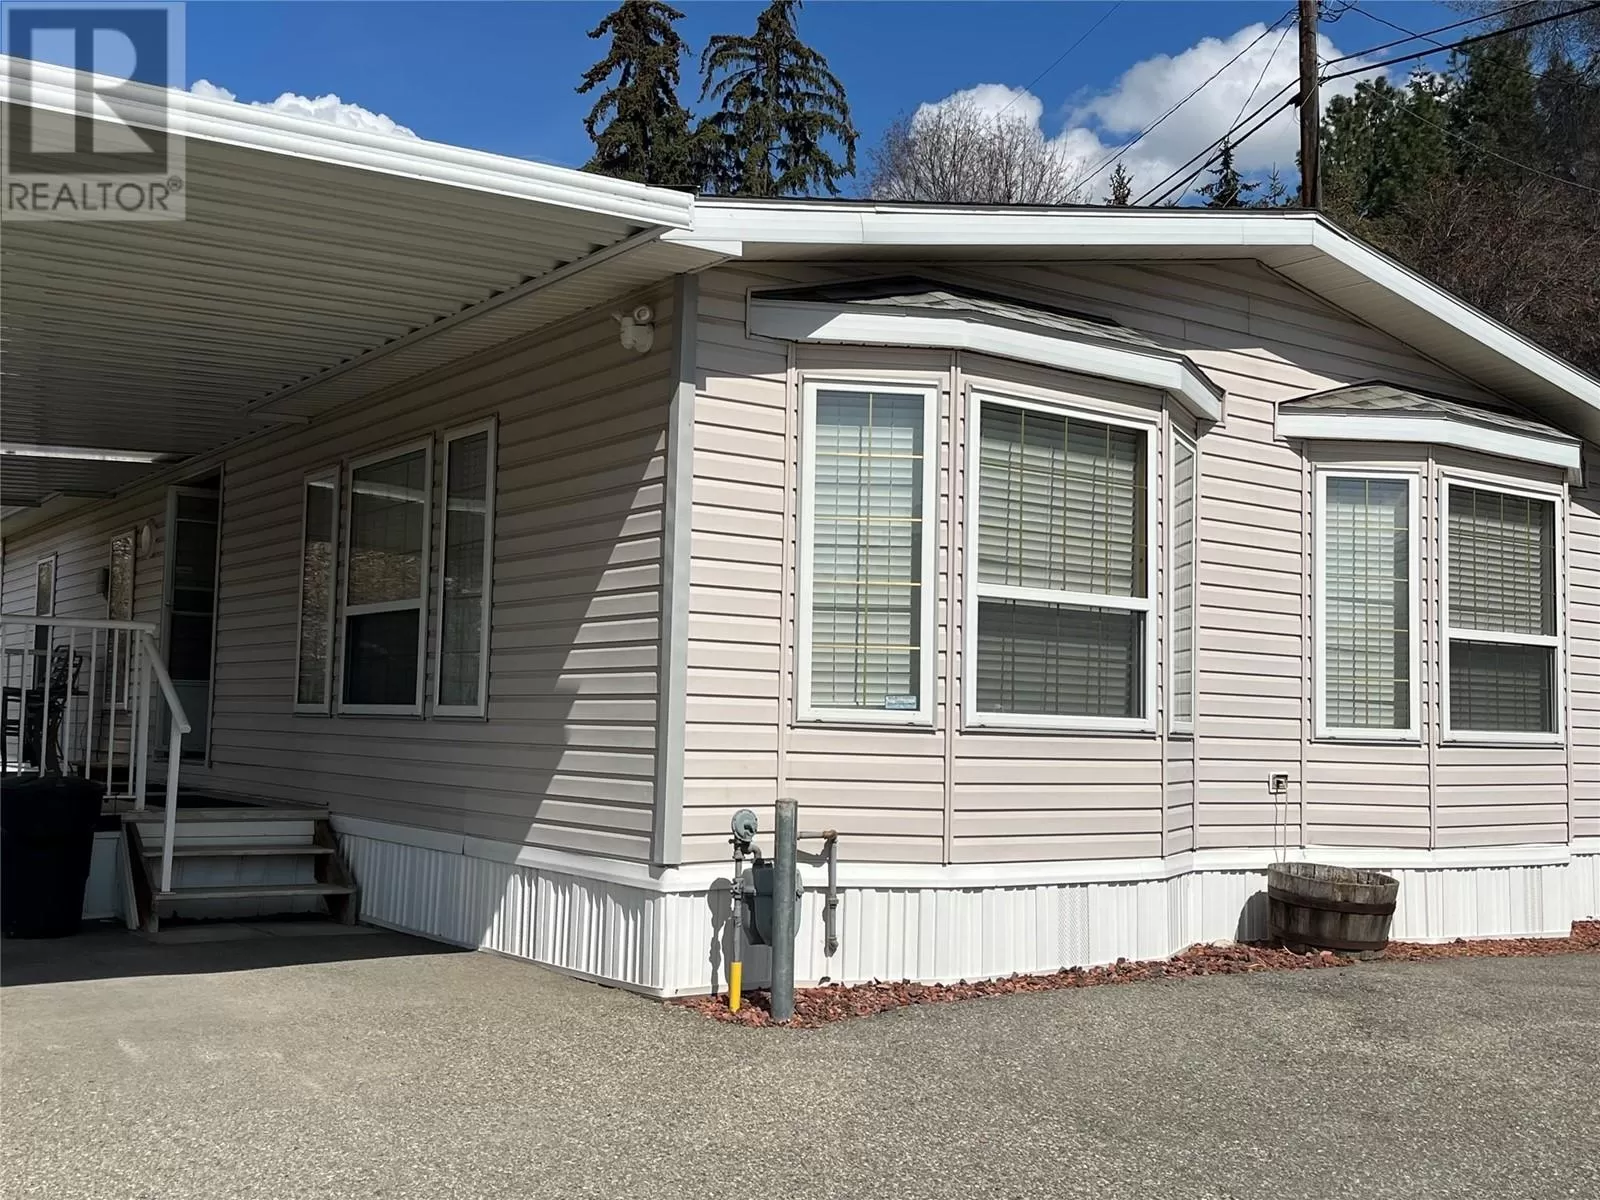 Manufactured Home for rent: 7611 Pleasant Valley Road, Vernon, British Columbia V1B 3R7